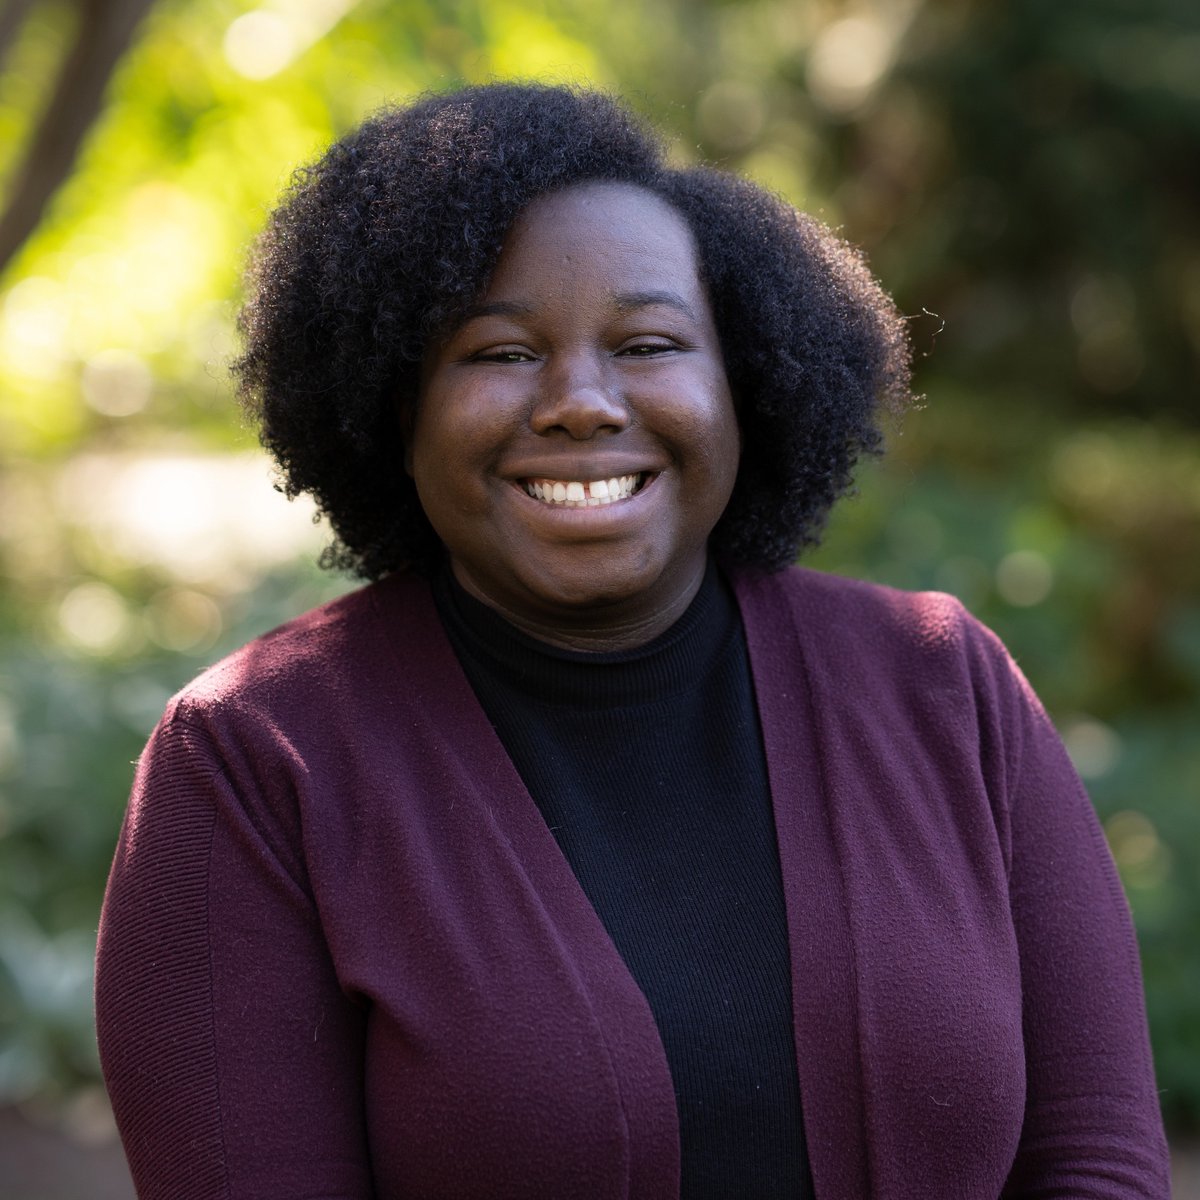 In her new role at the @RadInstitute, Patrice Green, ’19 MLIS alumna, will help create a more inclusive historical record as the curator for African American and African Diasporic Collections at the Schlesinger Library on the History of Women in America ➡️ sc.edu/study/colleges…